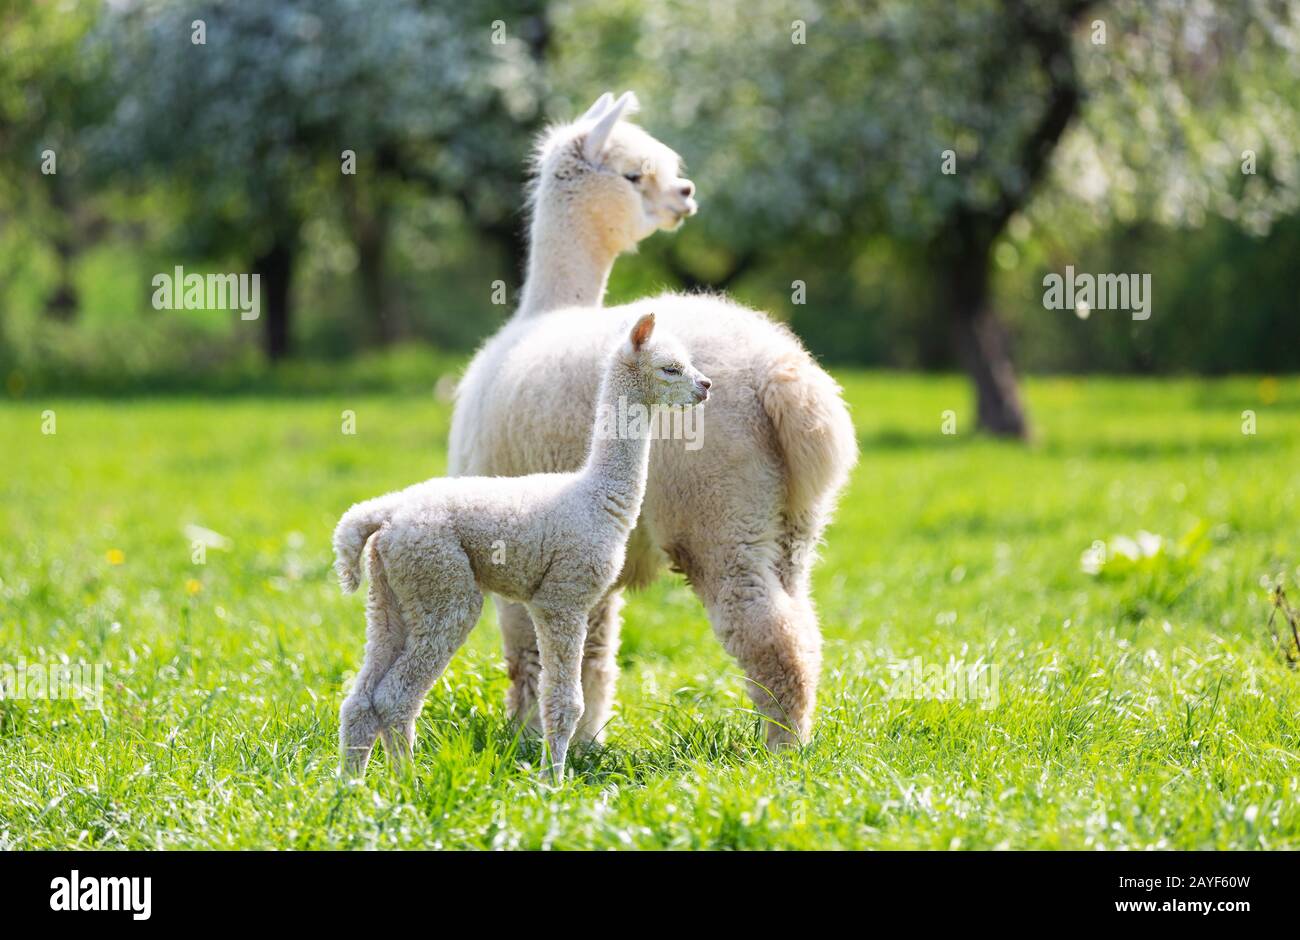 Alpaca with offspring, South American mammal Stock Photo